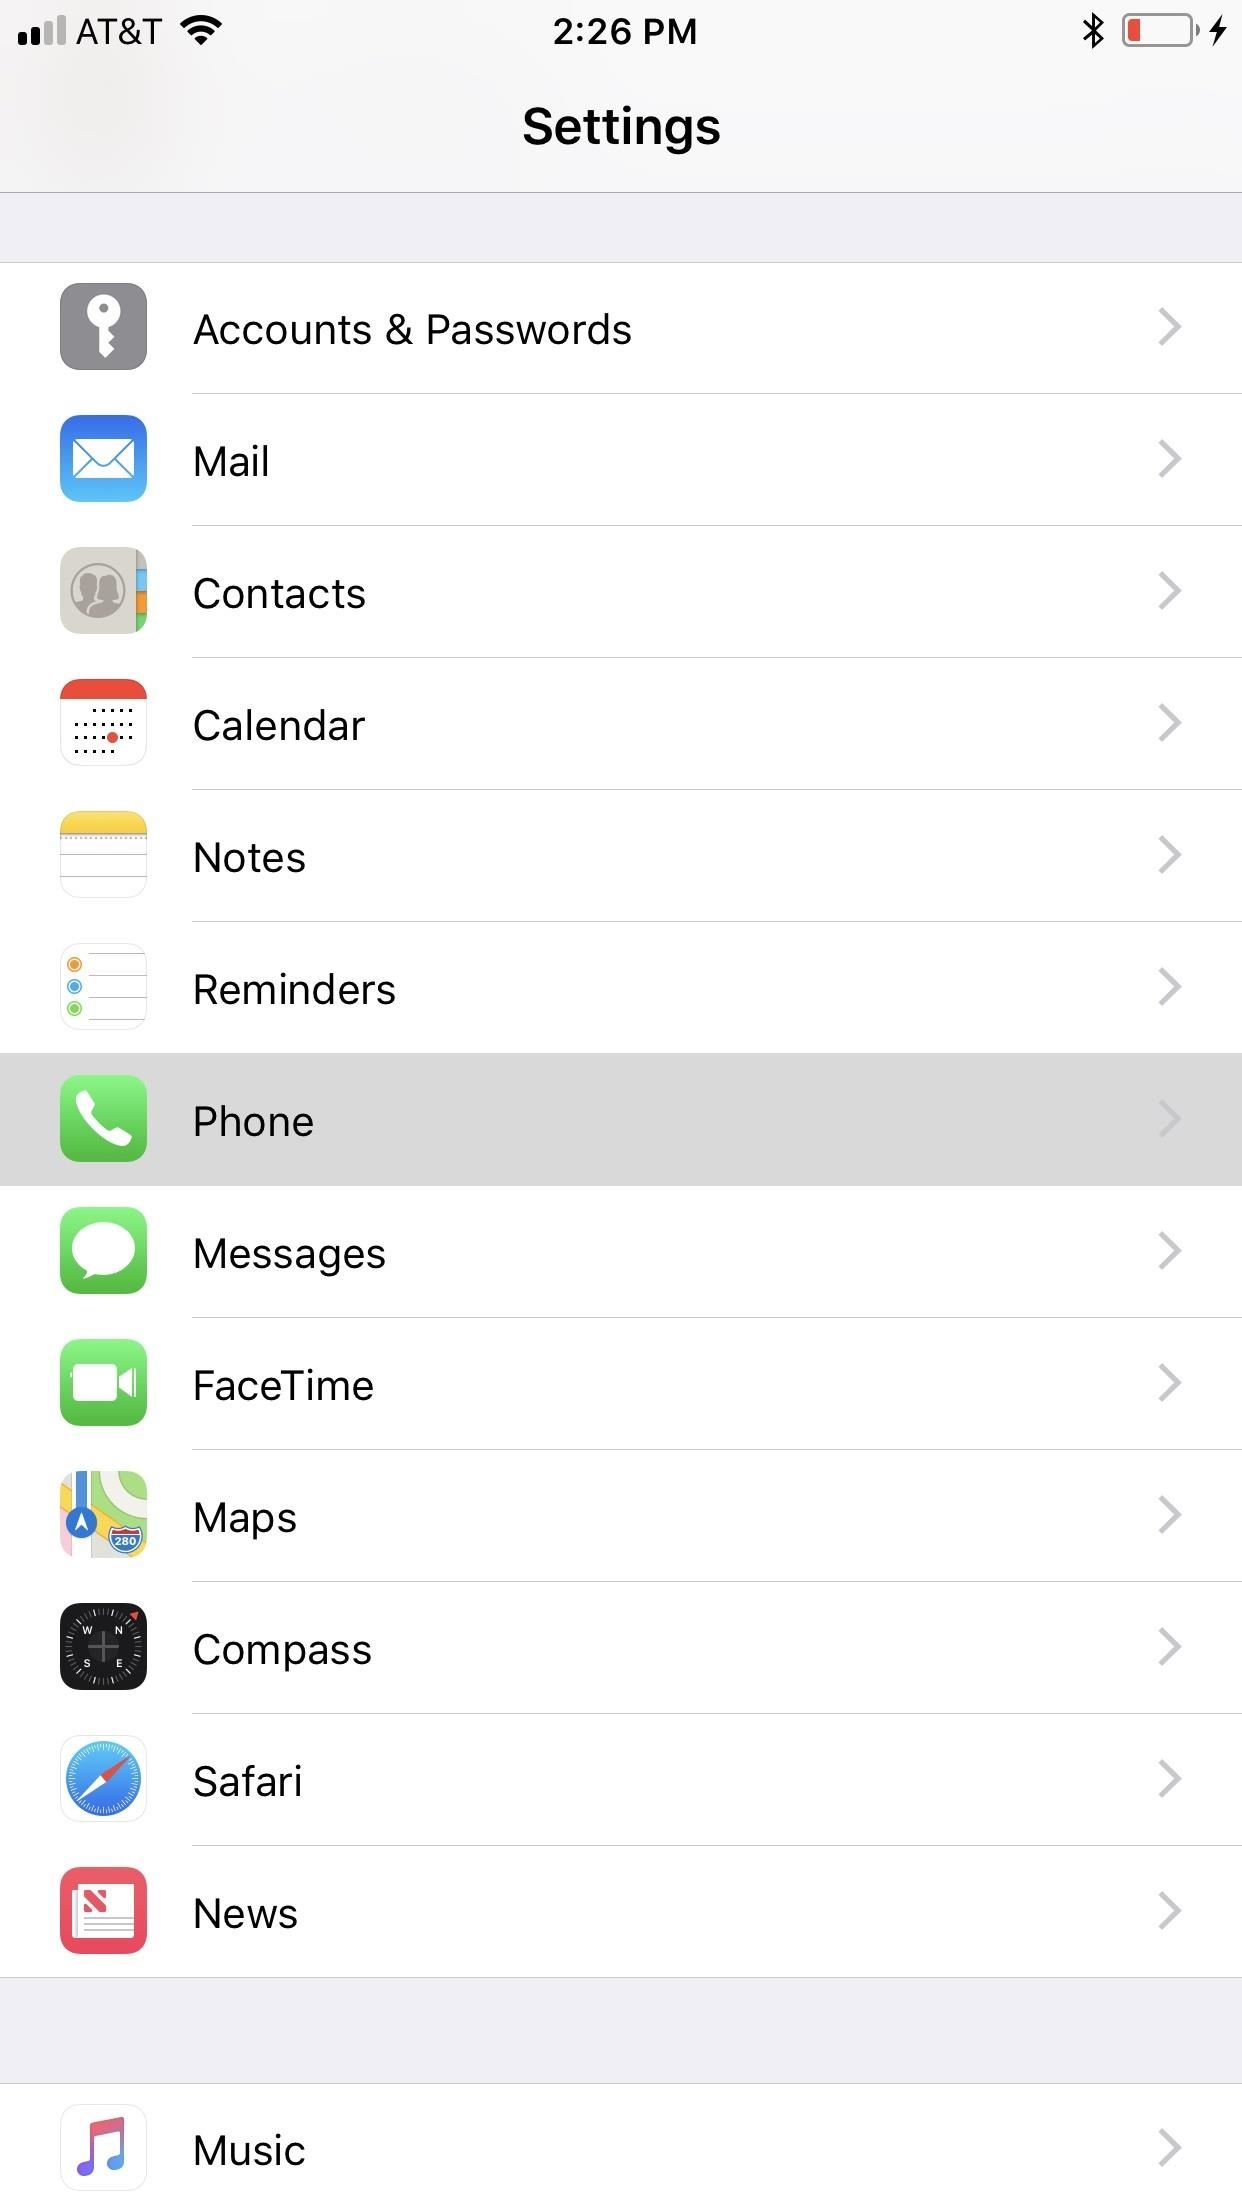 How to Make Anonymous Calls from Your iPhone « iOS & iPhone :: Gadget Hacks